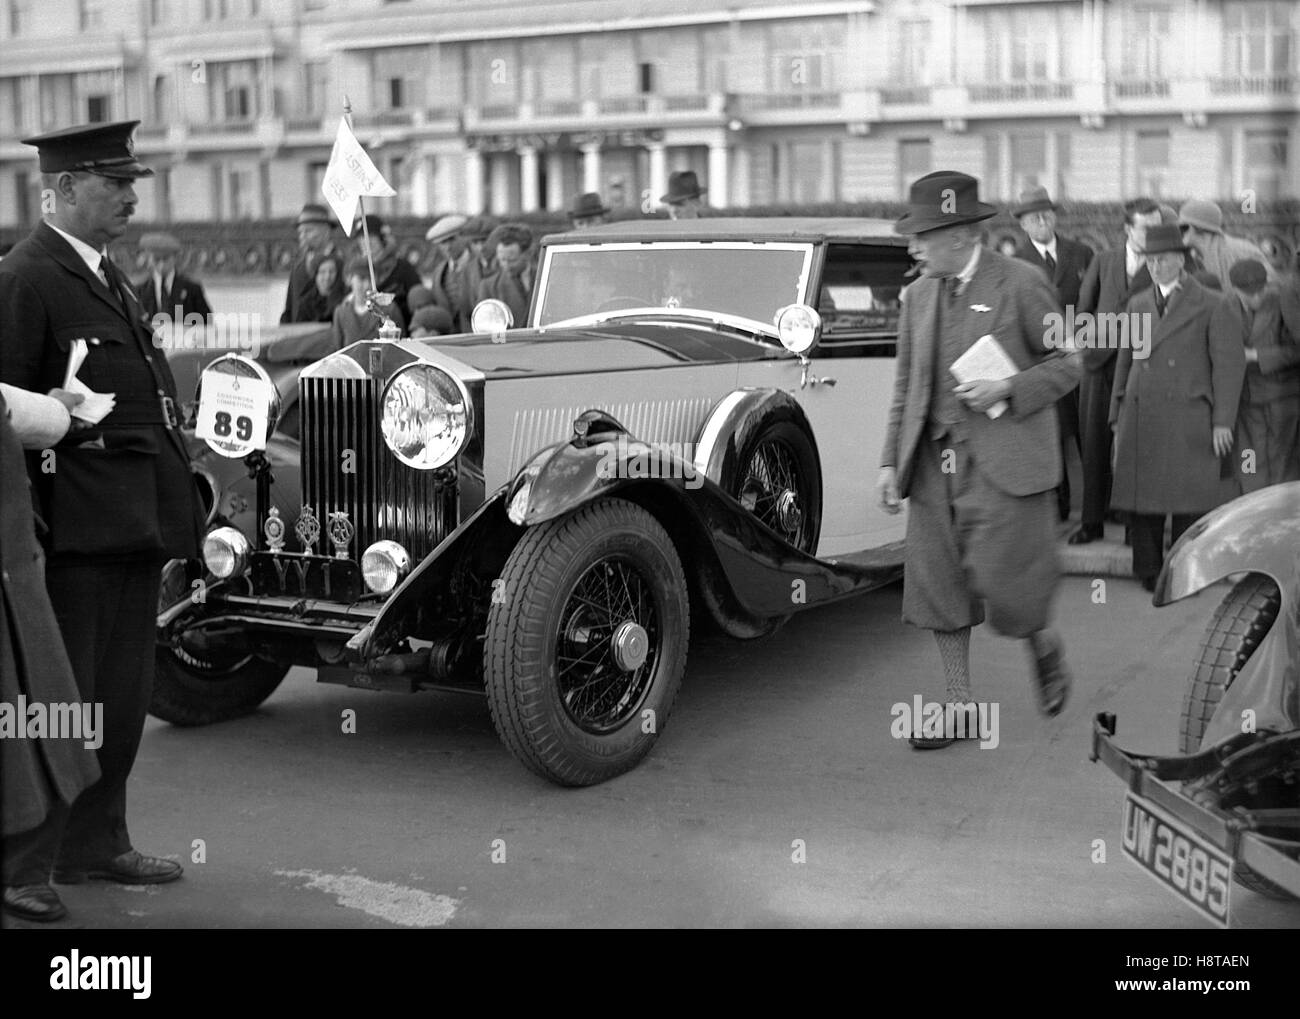 RAC RALLY 1933 Carrosseries COMP ROLLS ROYCE HASTINGS Banque D'Images